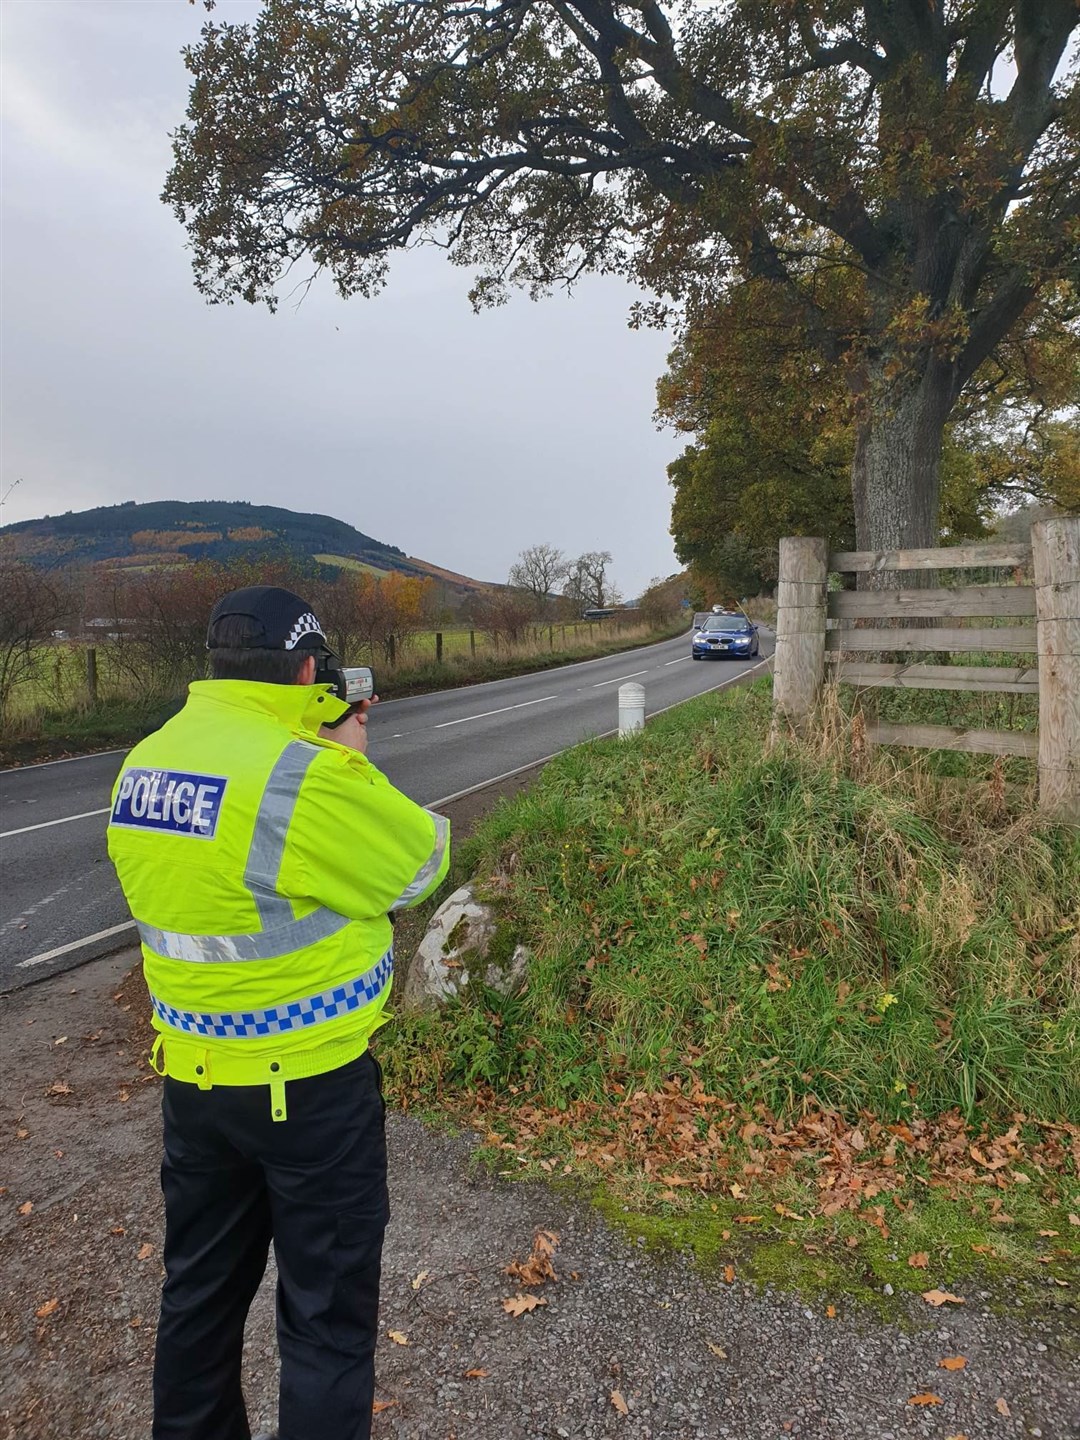 A police officer monitors vehicle speeds near Beauly.